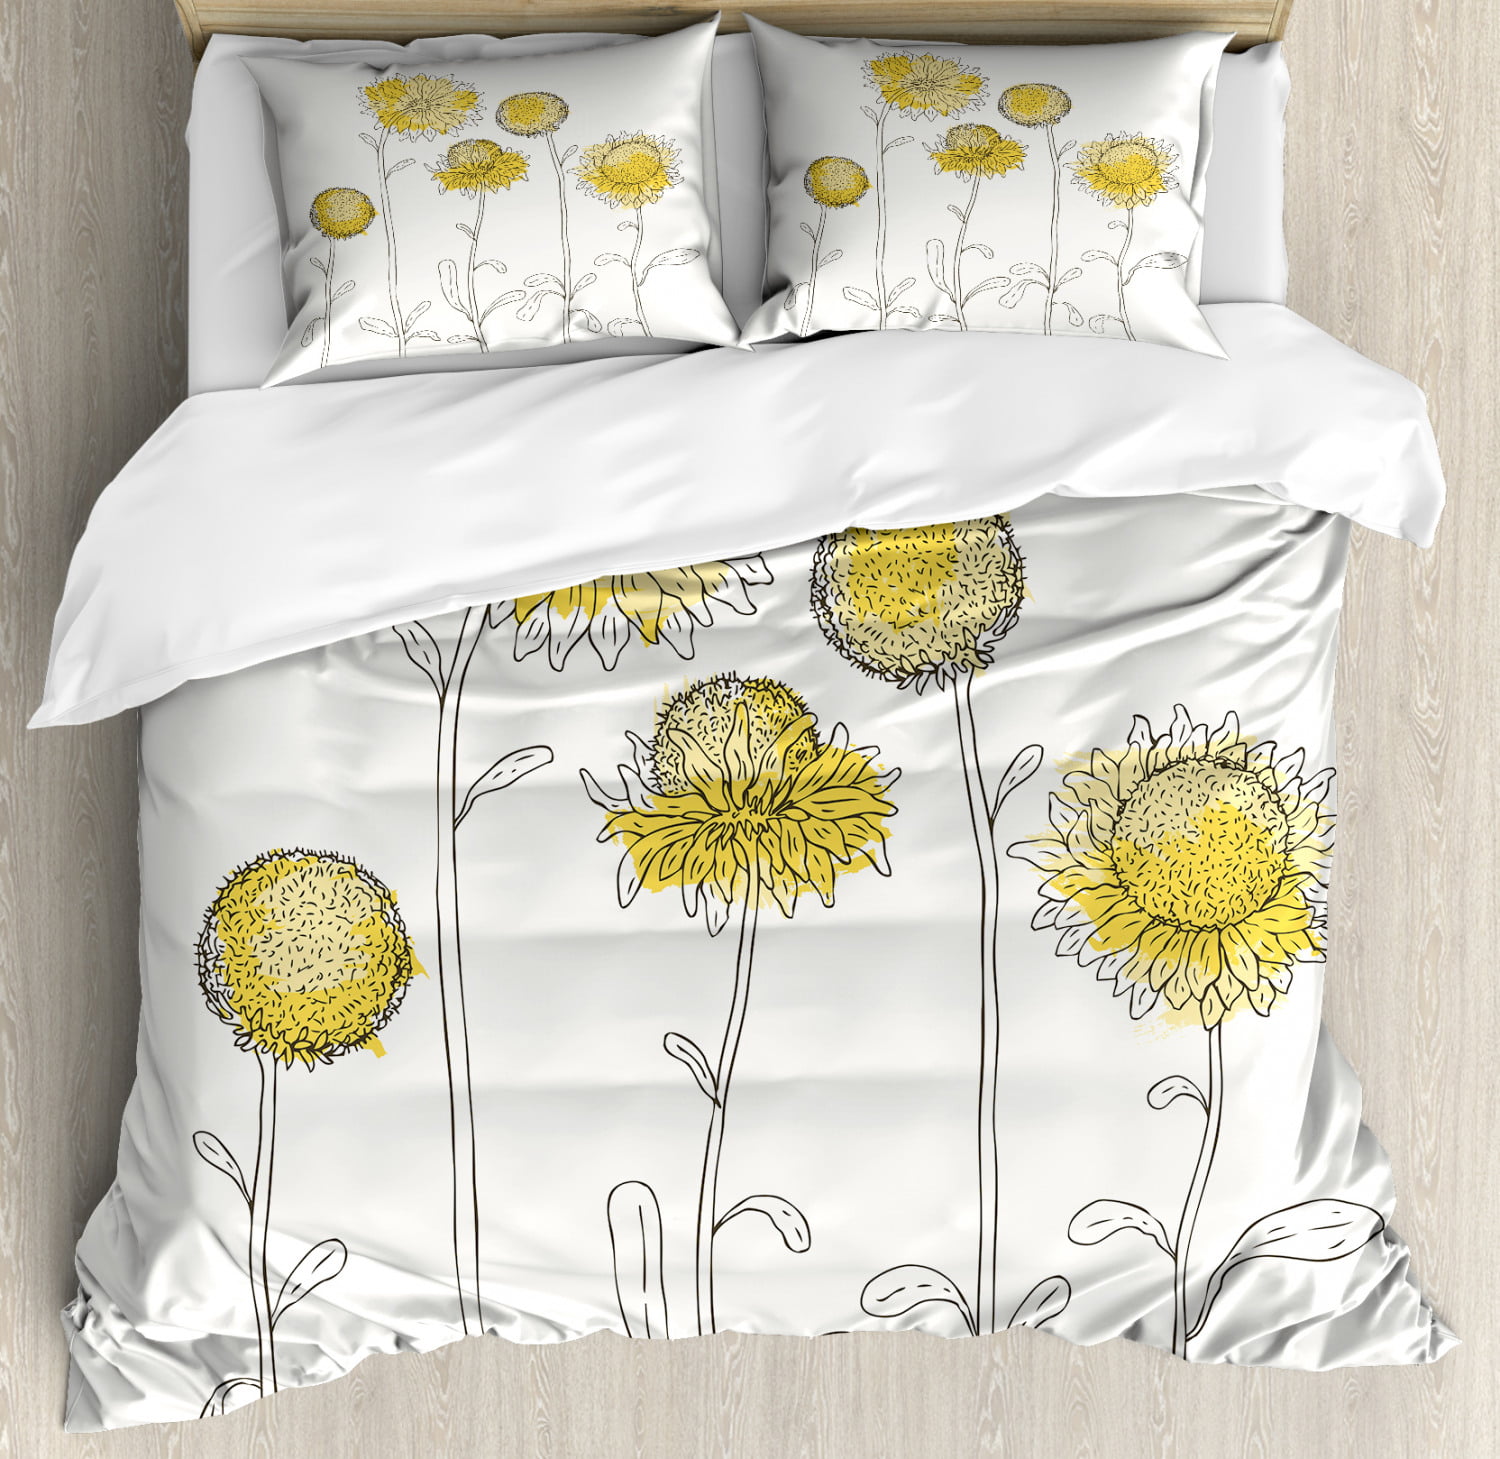 Yellow Flower Duvet Cover Set Hand Drawn Style Sunflowers On